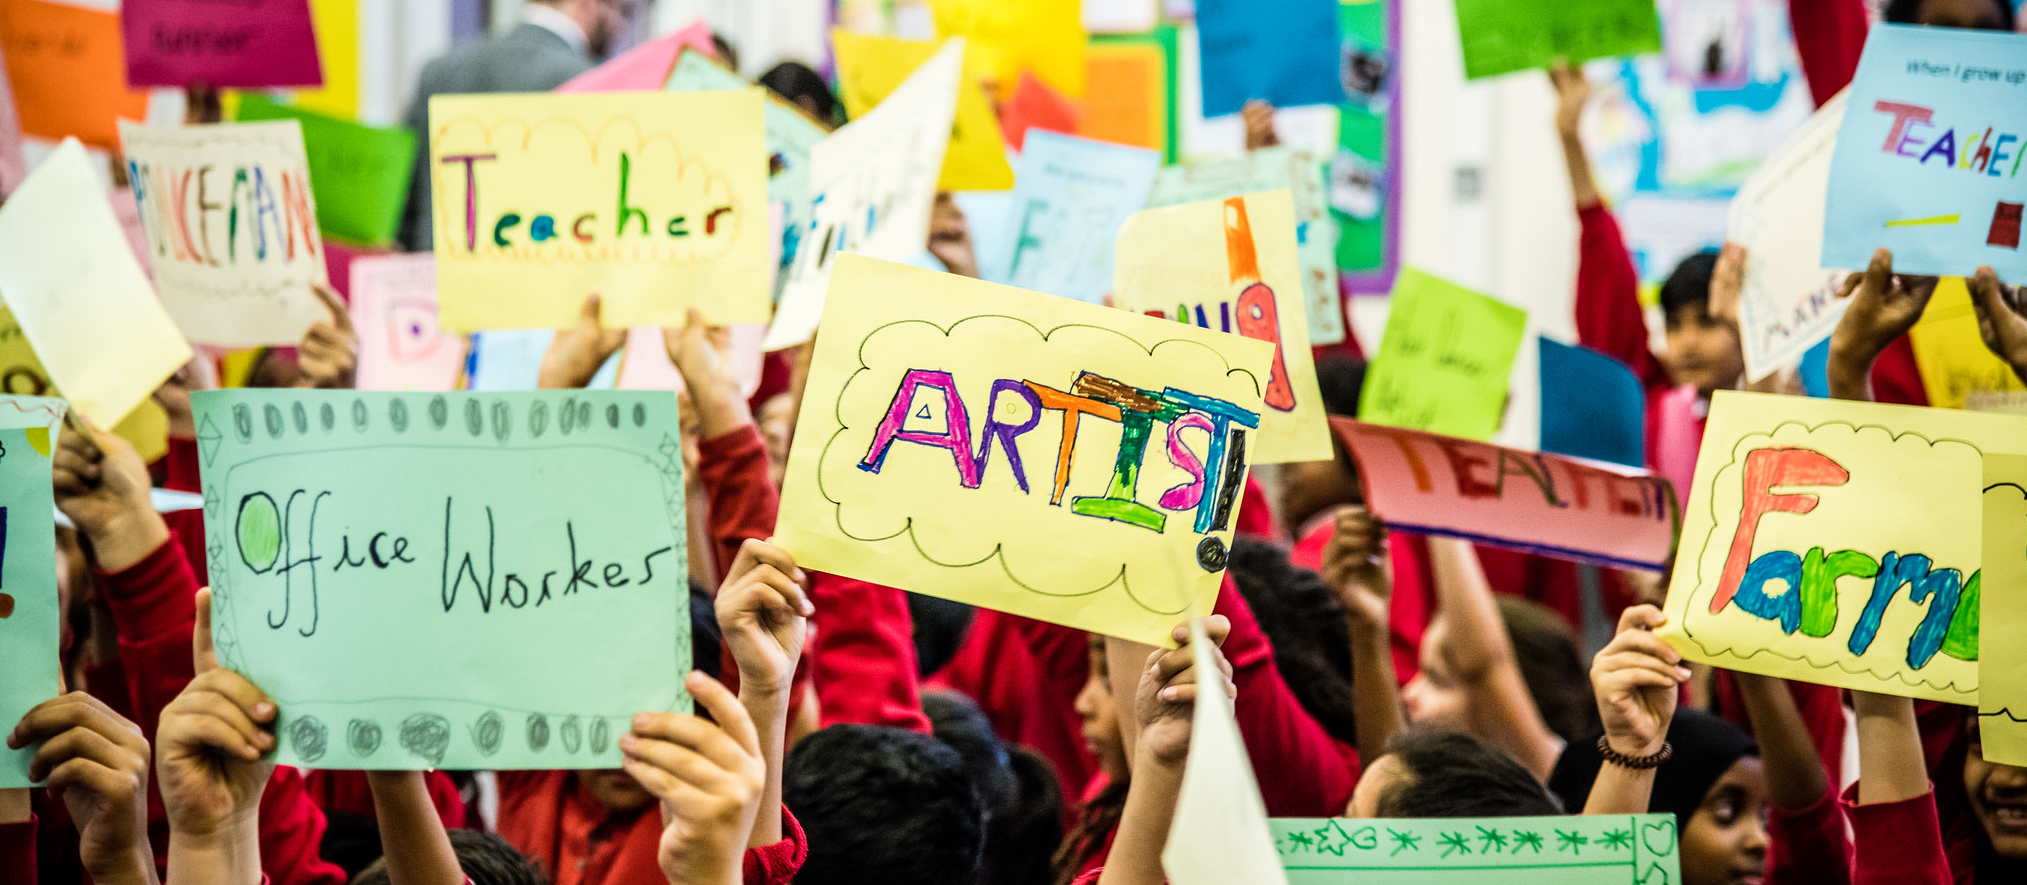 Children hold up colourful signs of the jobs they want when they grow up: artist, office worker, teacher